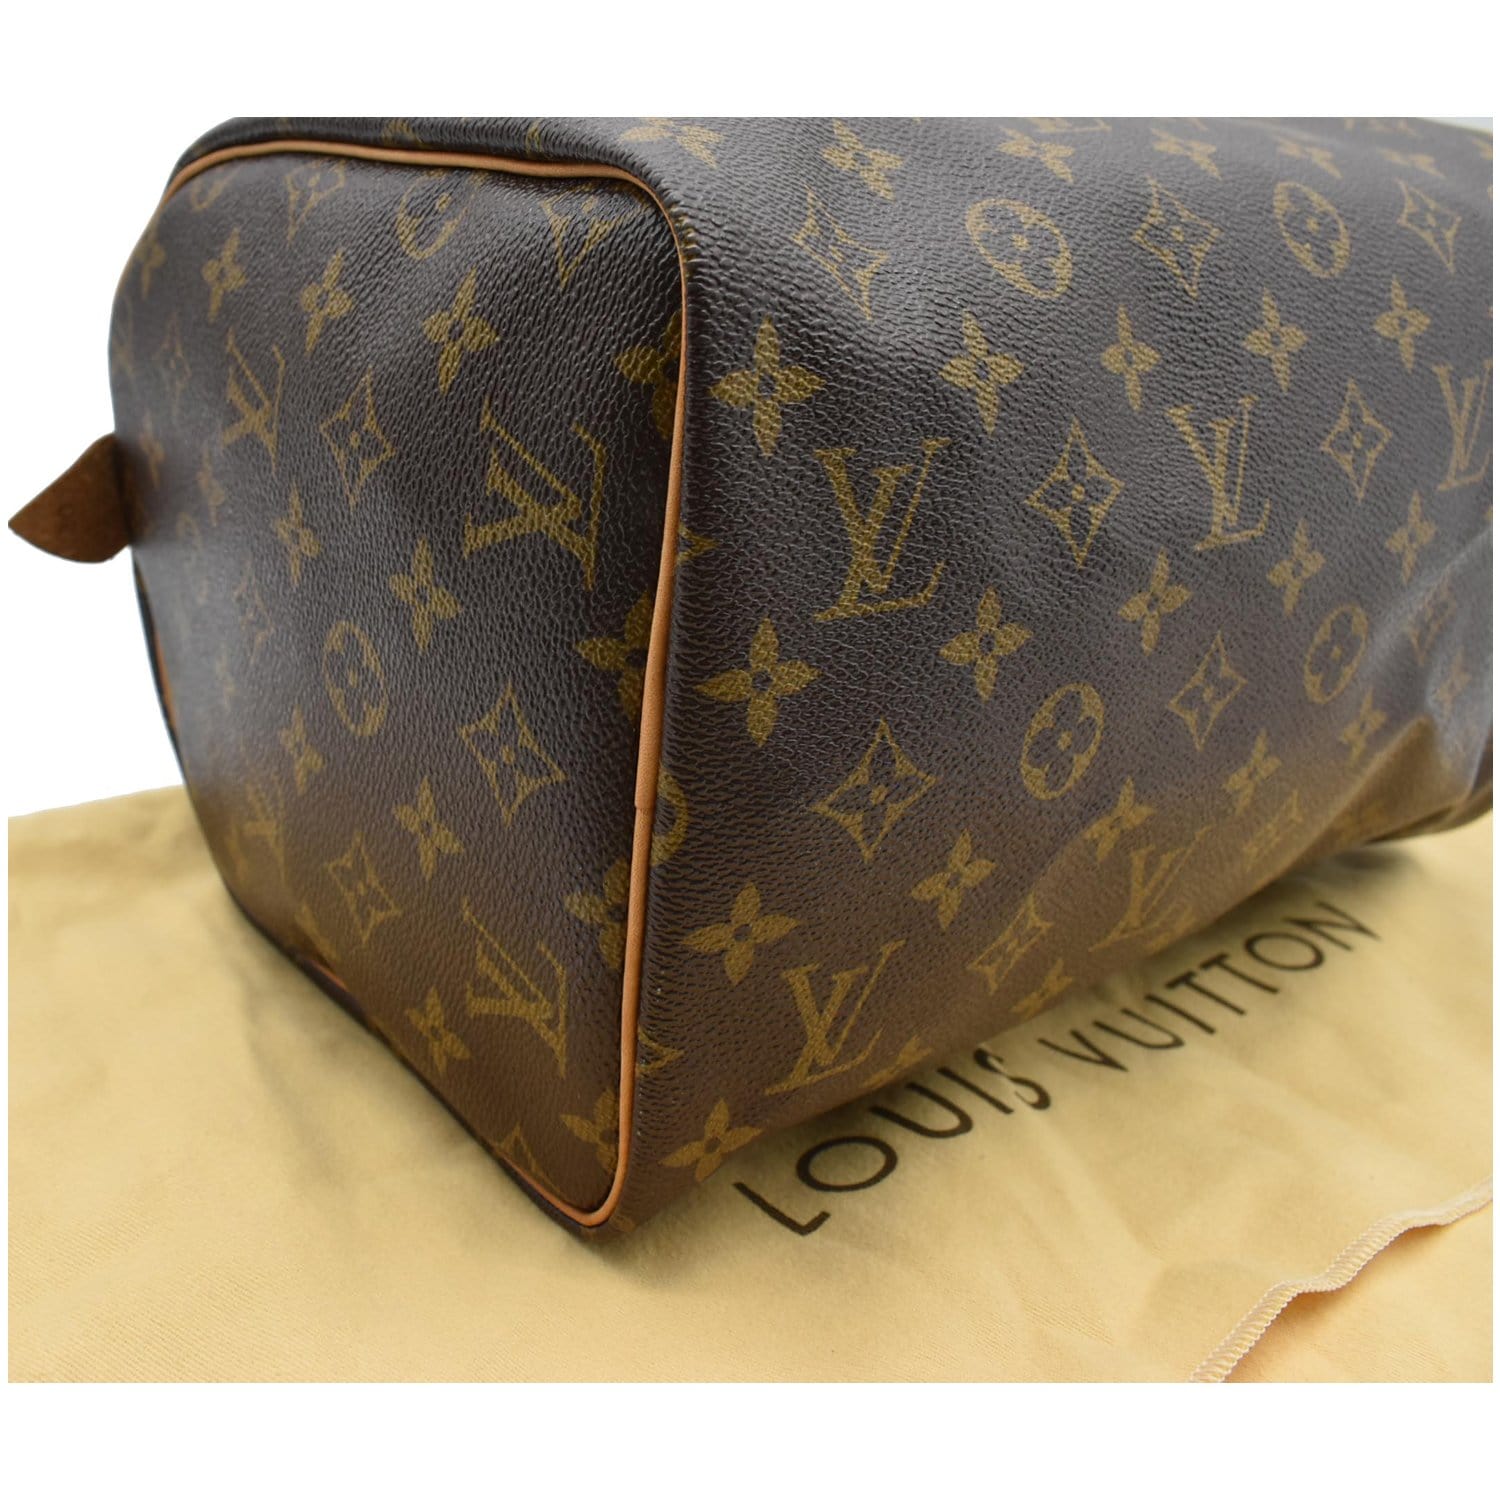 Louis Vuitton 2010 Pre-owned Limited Edition Speedy 30 Bag